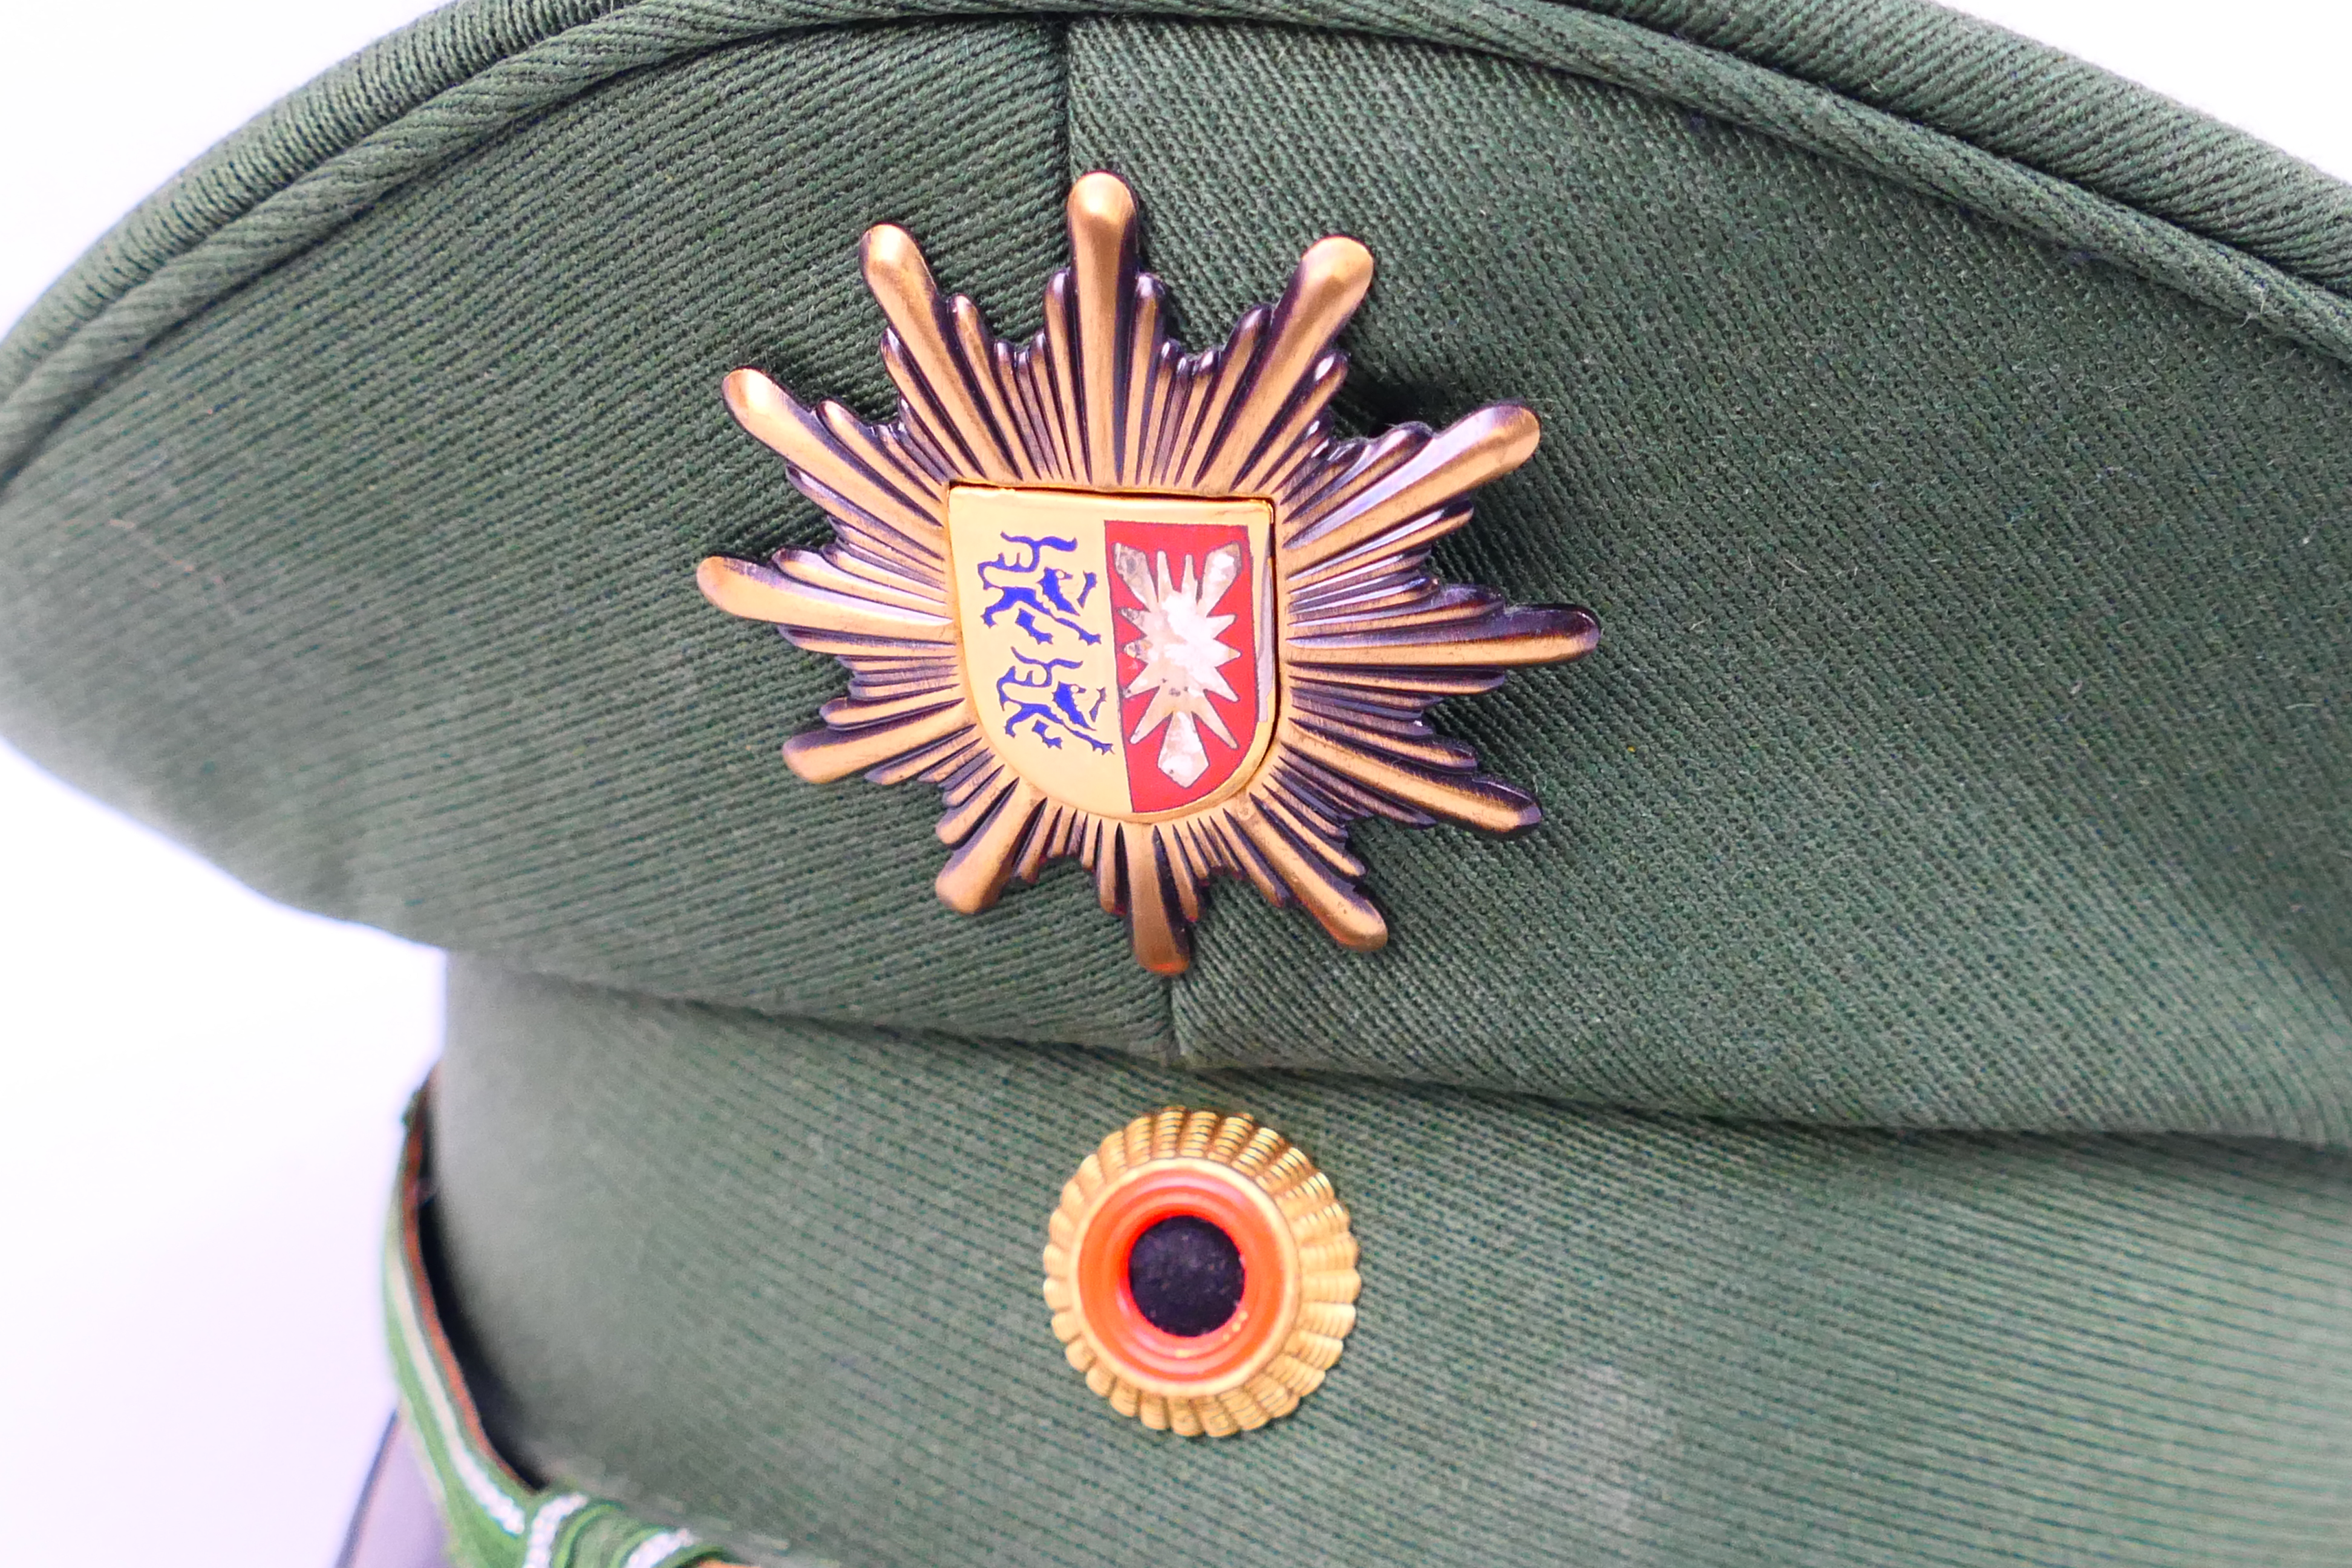 A German green police hat. - Image 2 of 4